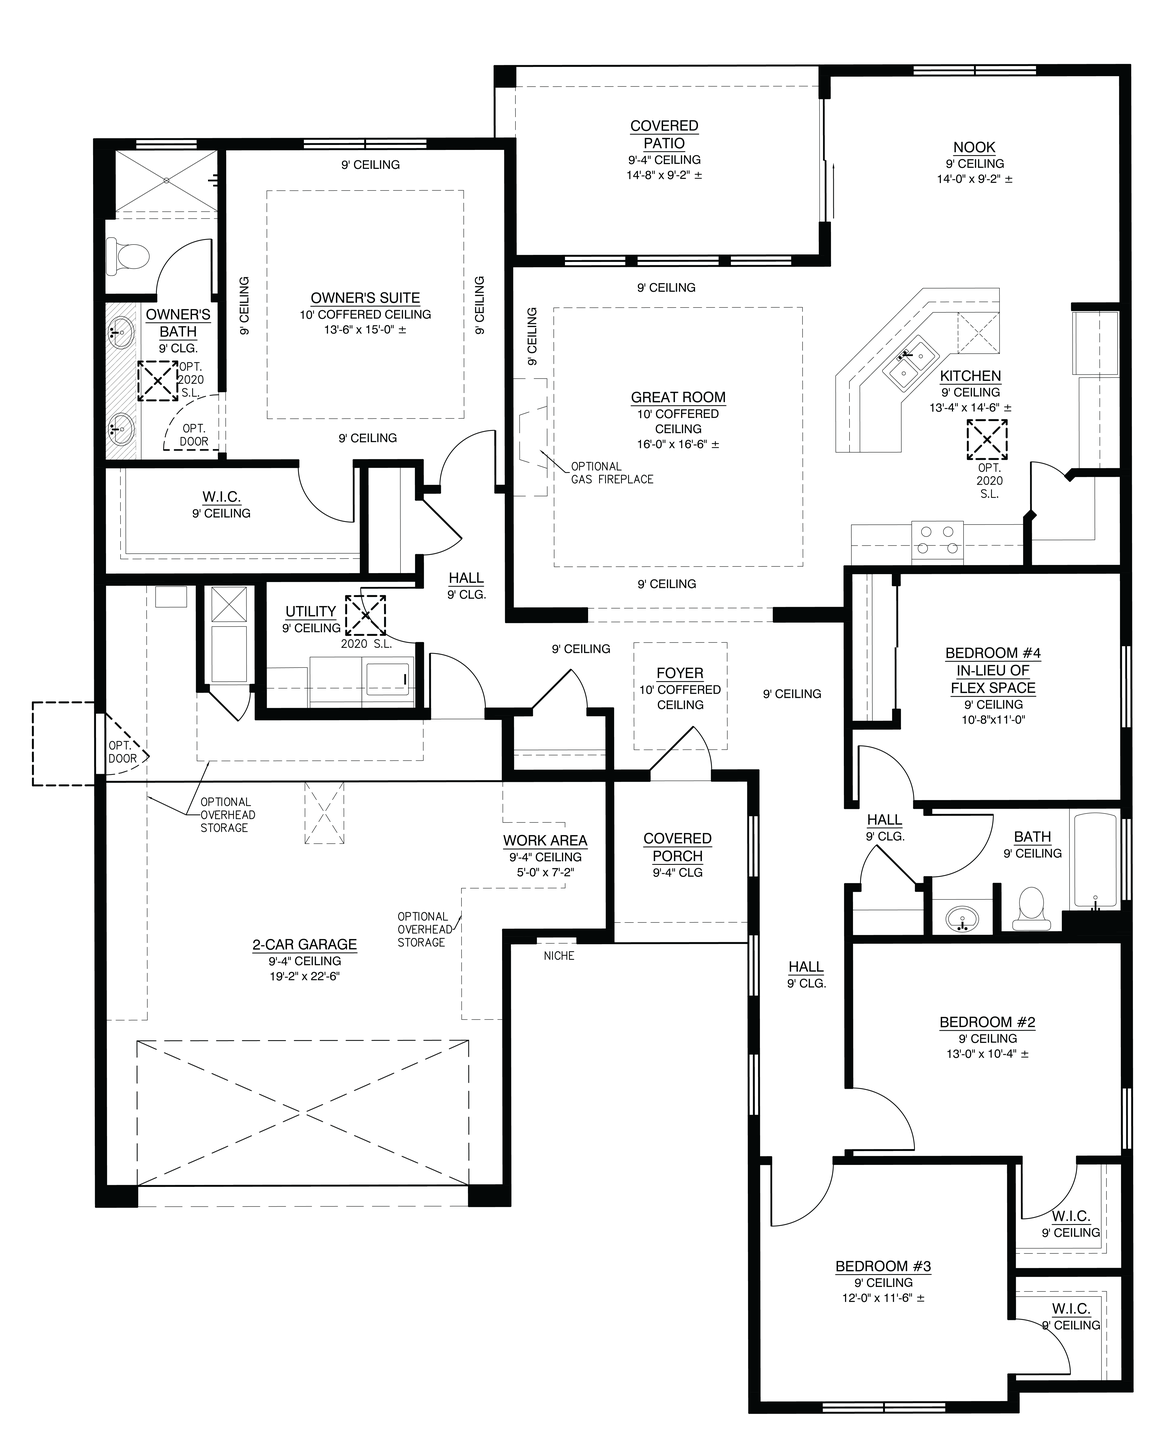 The Anne Floor Plan with optional 4th bedroom in lieu of flex space